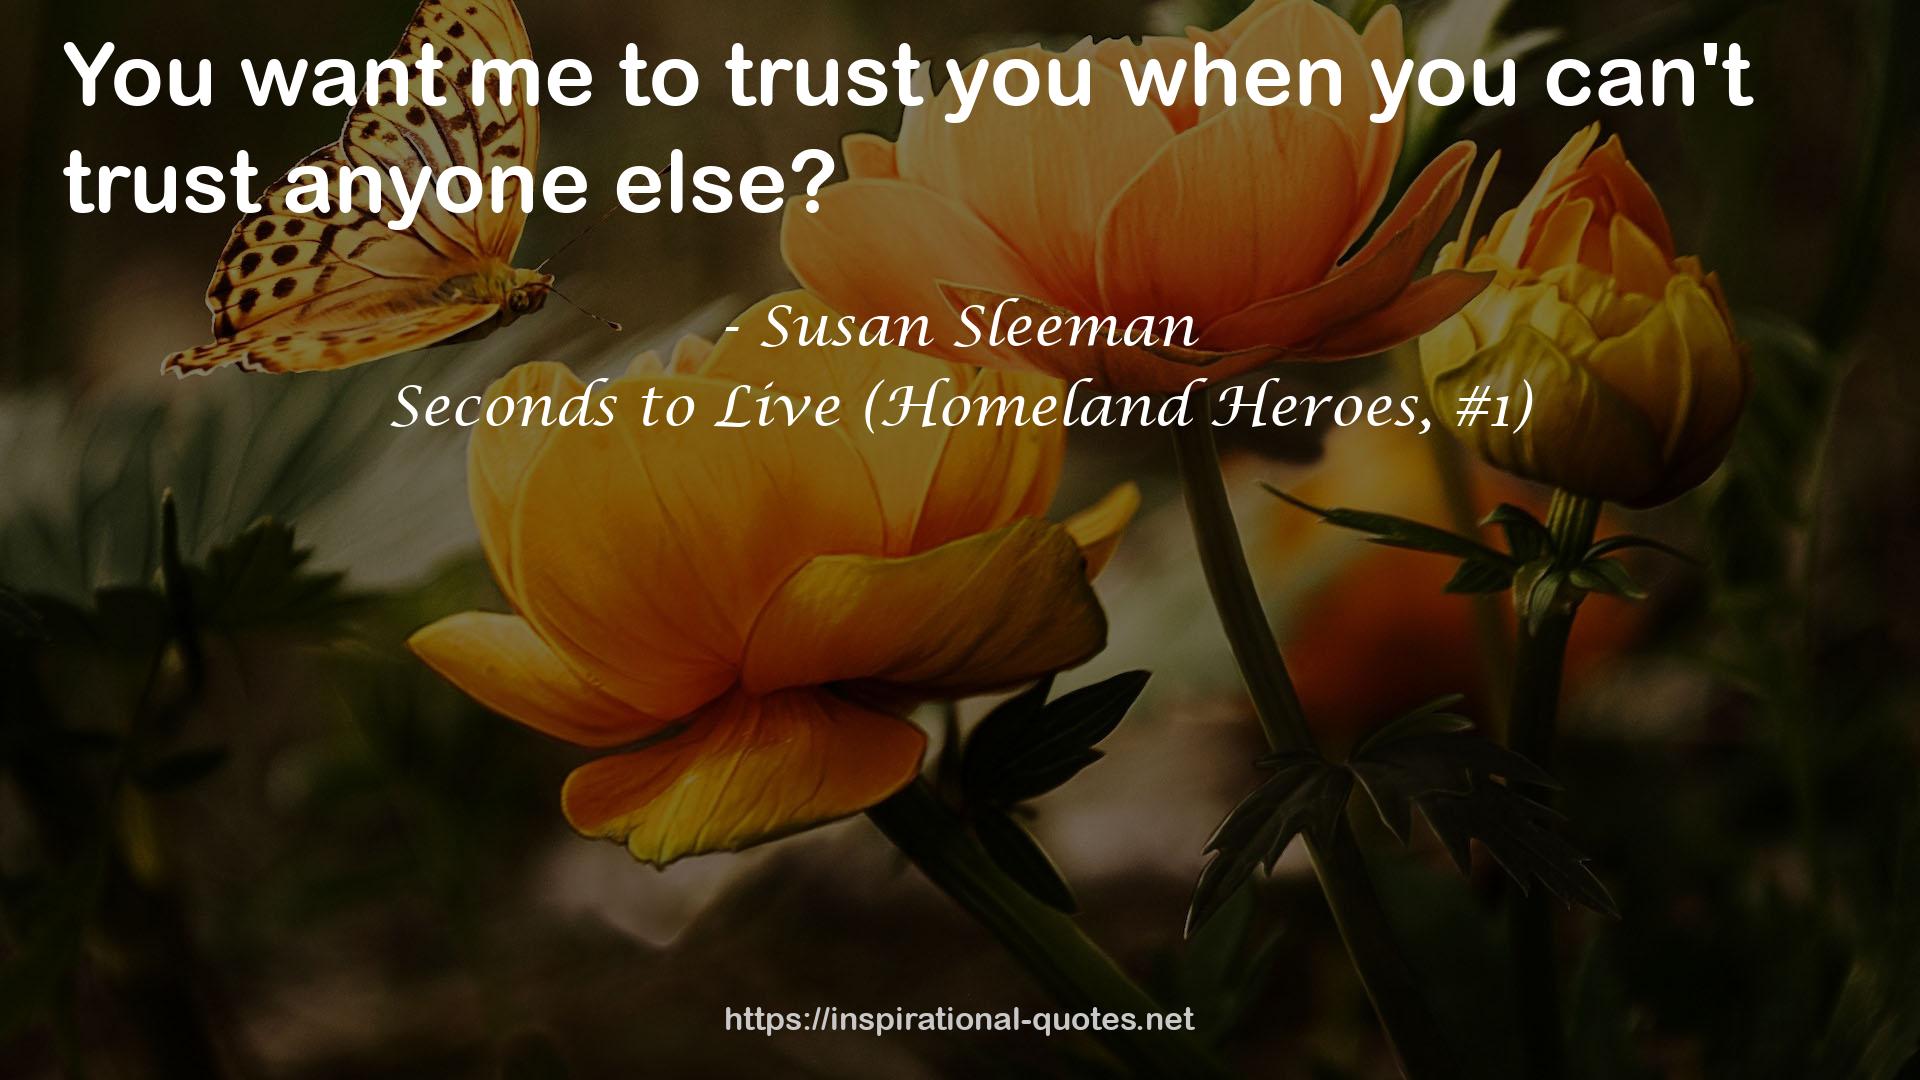 Seconds to Live (Homeland Heroes, #1) QUOTES